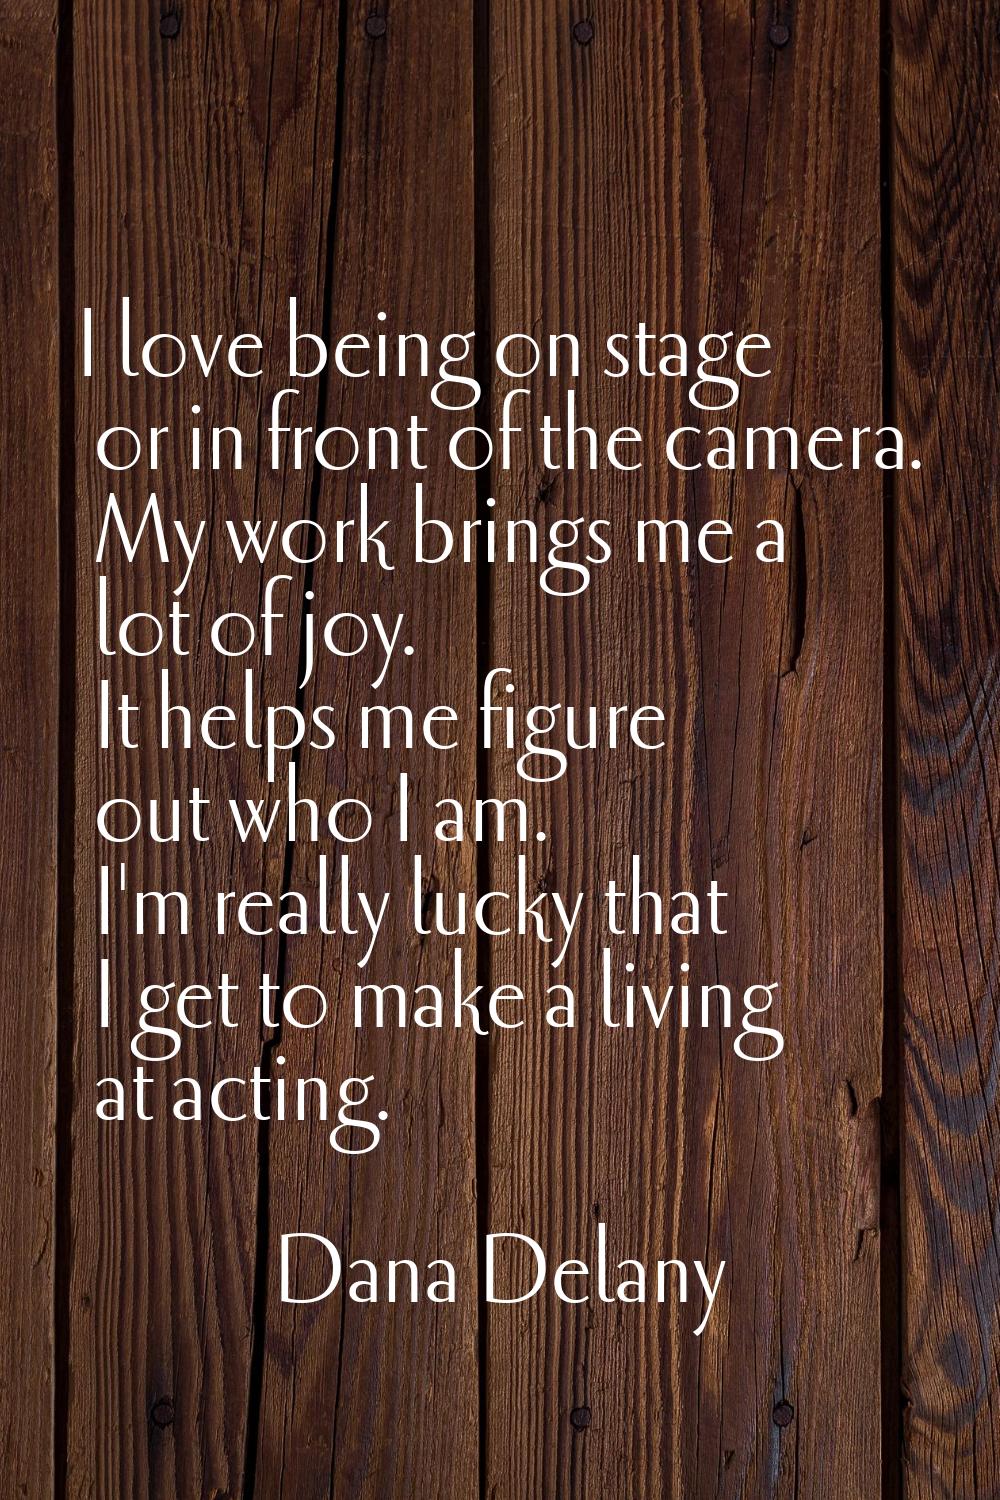 I love being on stage or in front of the camera. My work brings me a lot of joy. It helps me figure